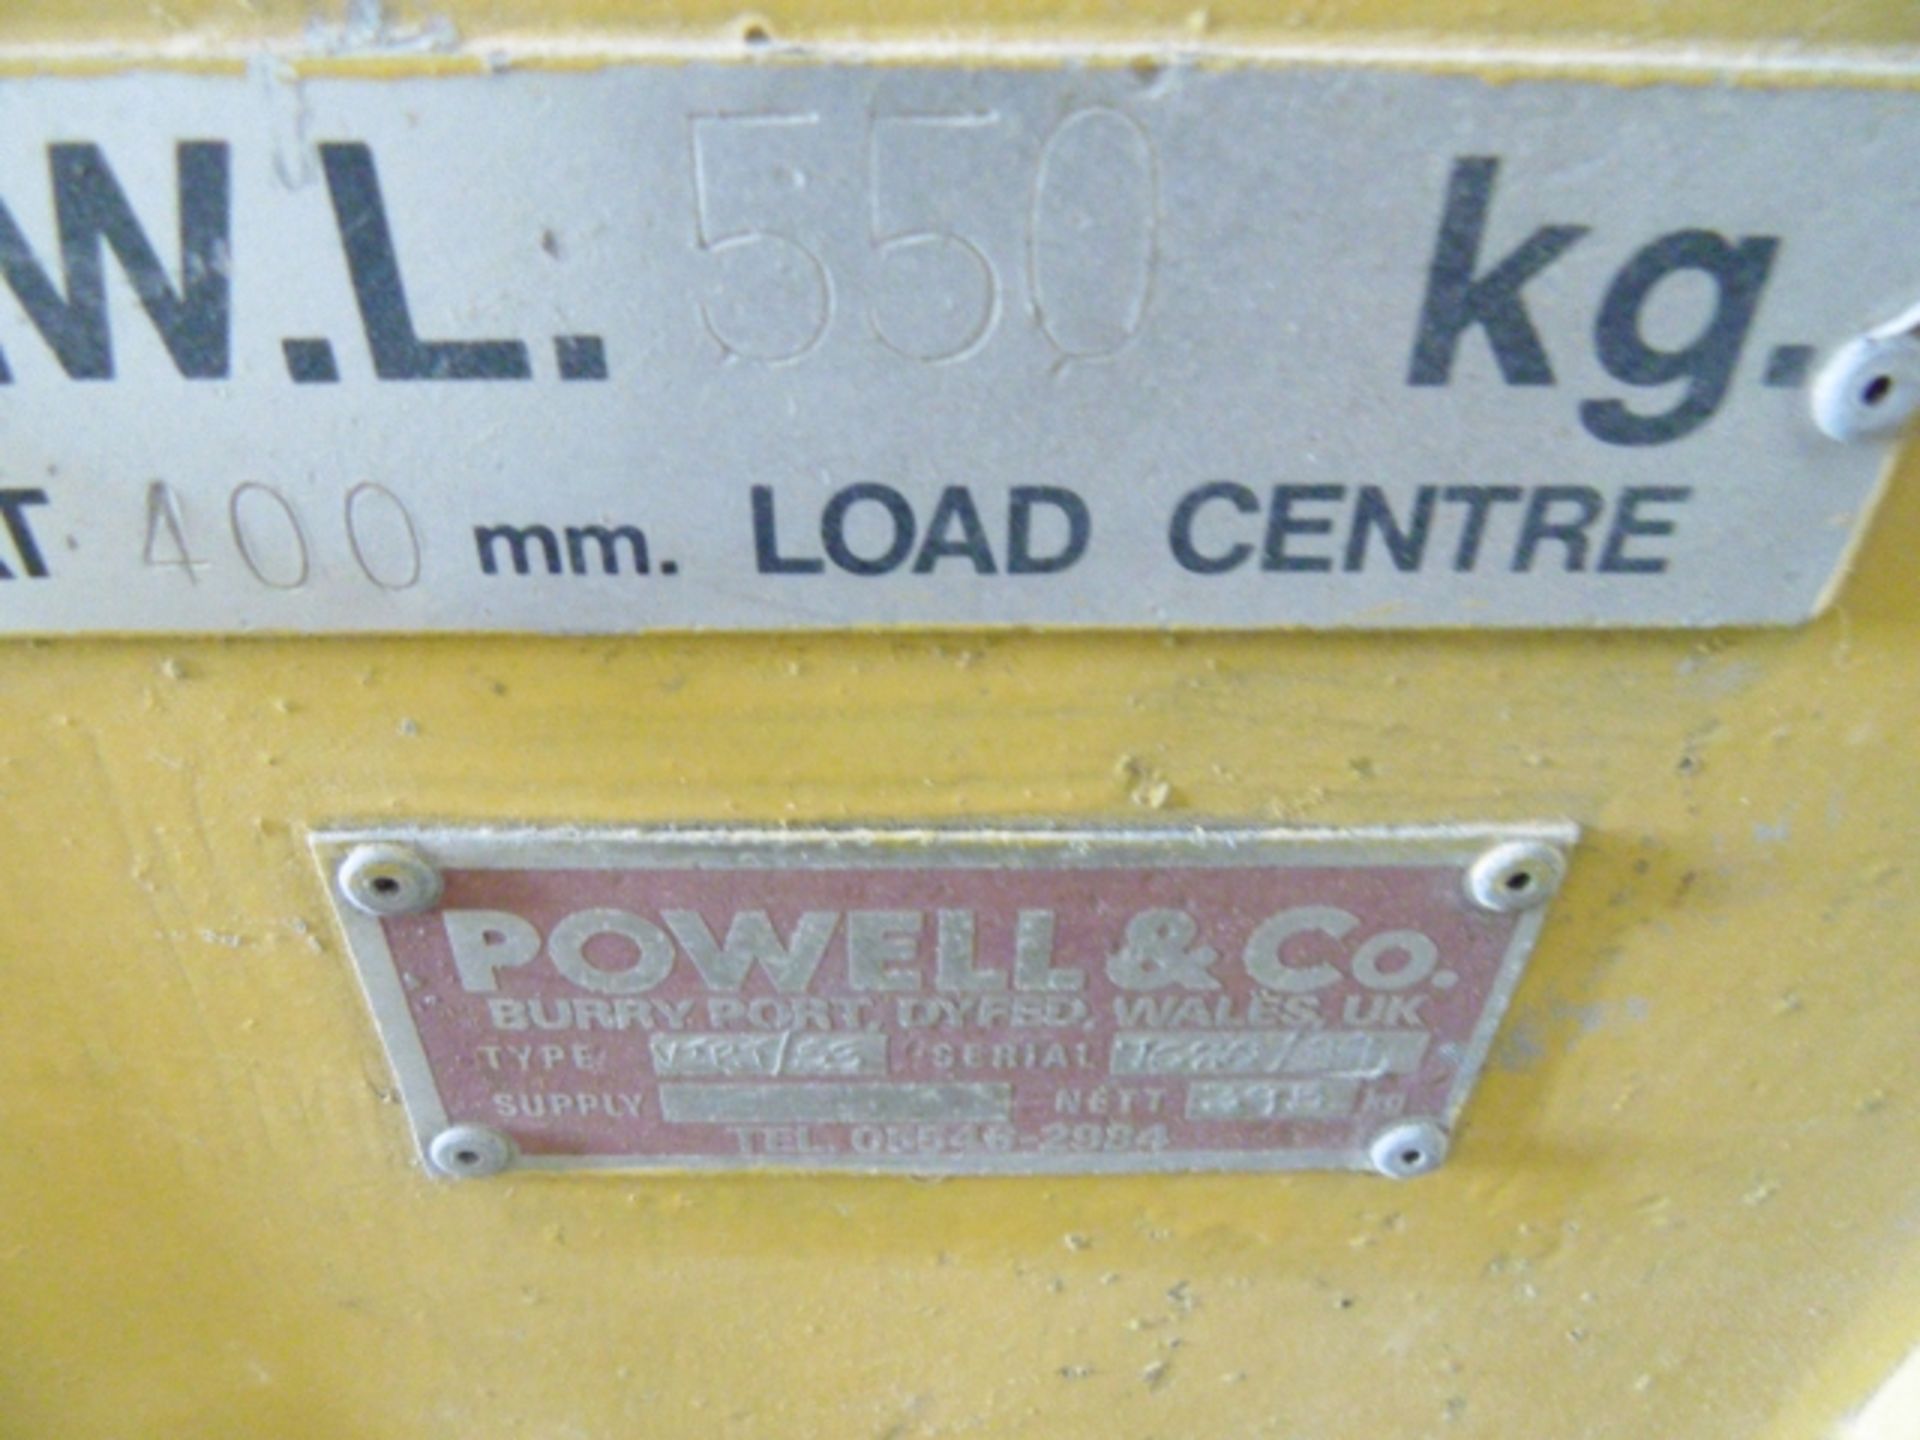 Powell & Co Vertolifter Type VTRT/55 Mobile Lifter with Barrel Clamp Attachment; SWL 360KG @ - Image 4 of 5